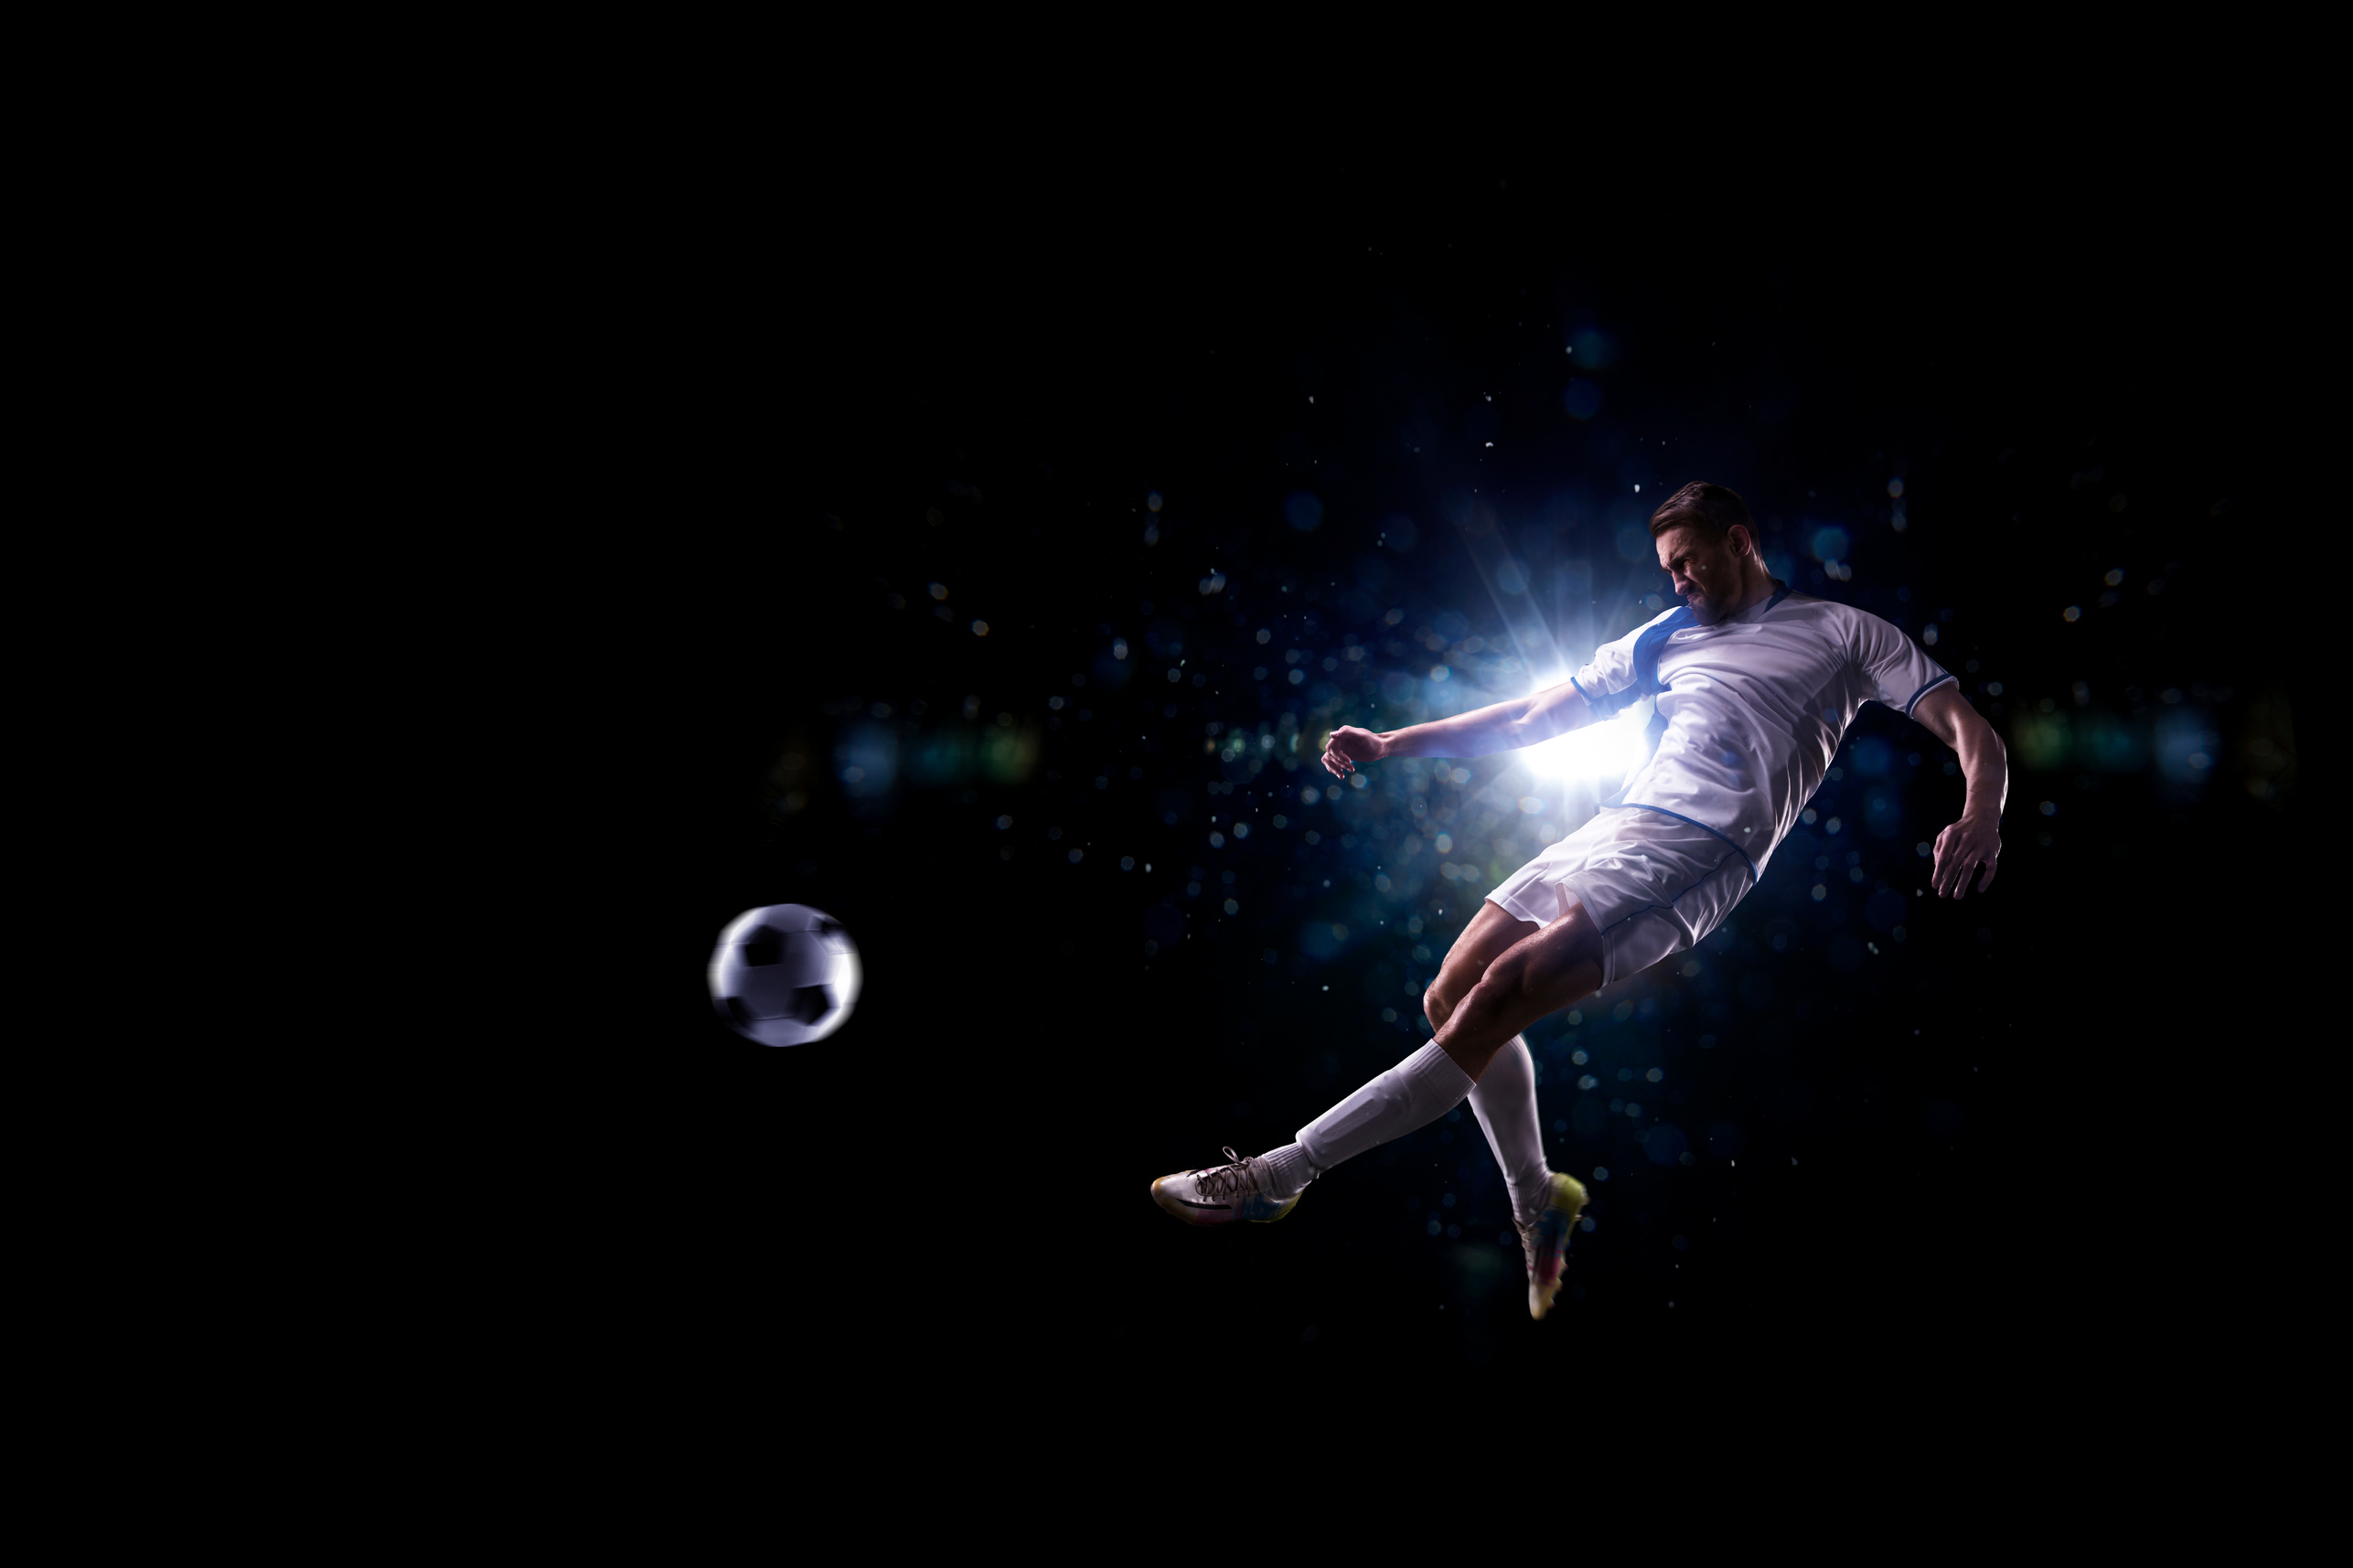 Soccer player in action over black background